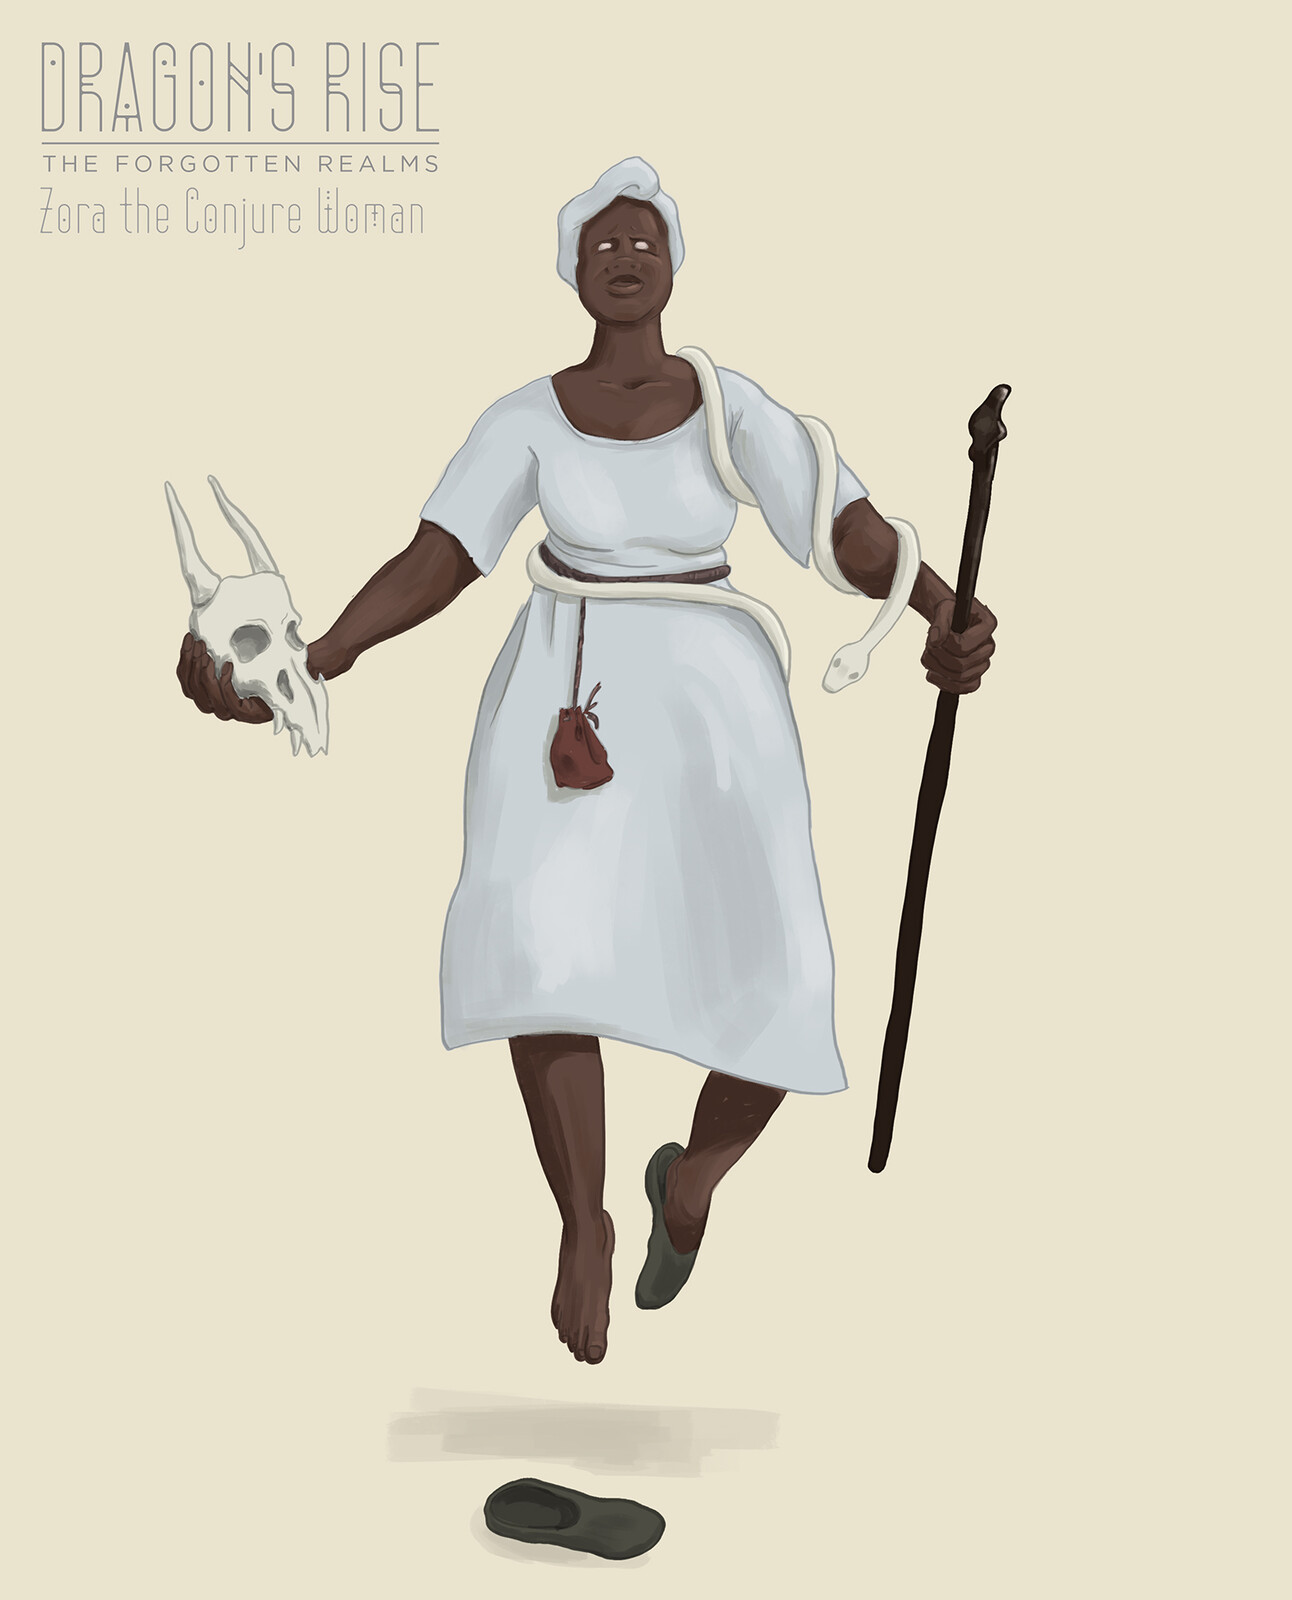 ZORA, THE CONJURE WOMAN - Mentor and guide to The Weevil, she uses her holy magic to put a charm on Geechee the Vodou Golem and to summon the Black Mamba Wyrm.